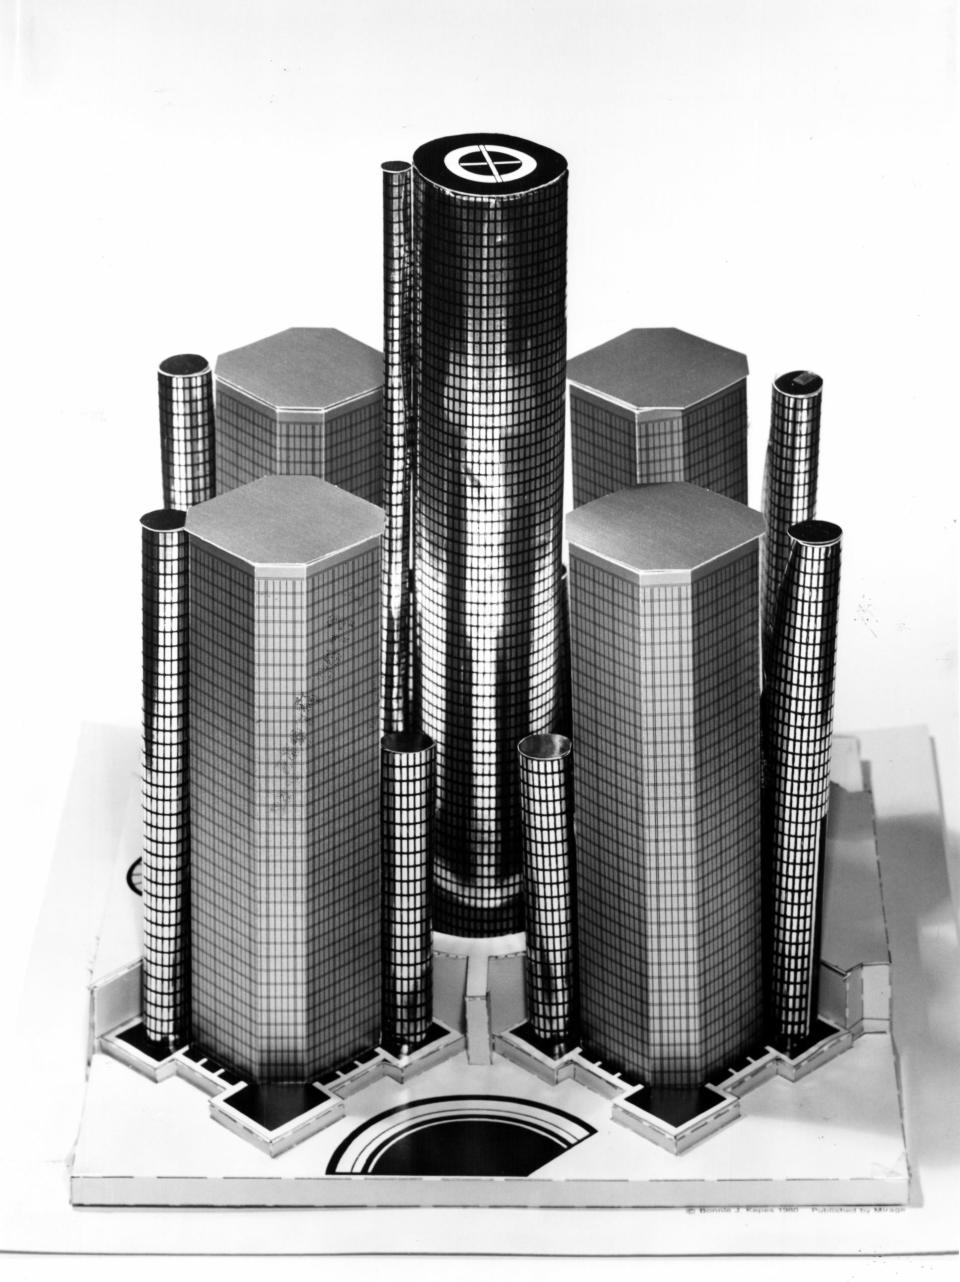 A model of the original five Rencen towers.